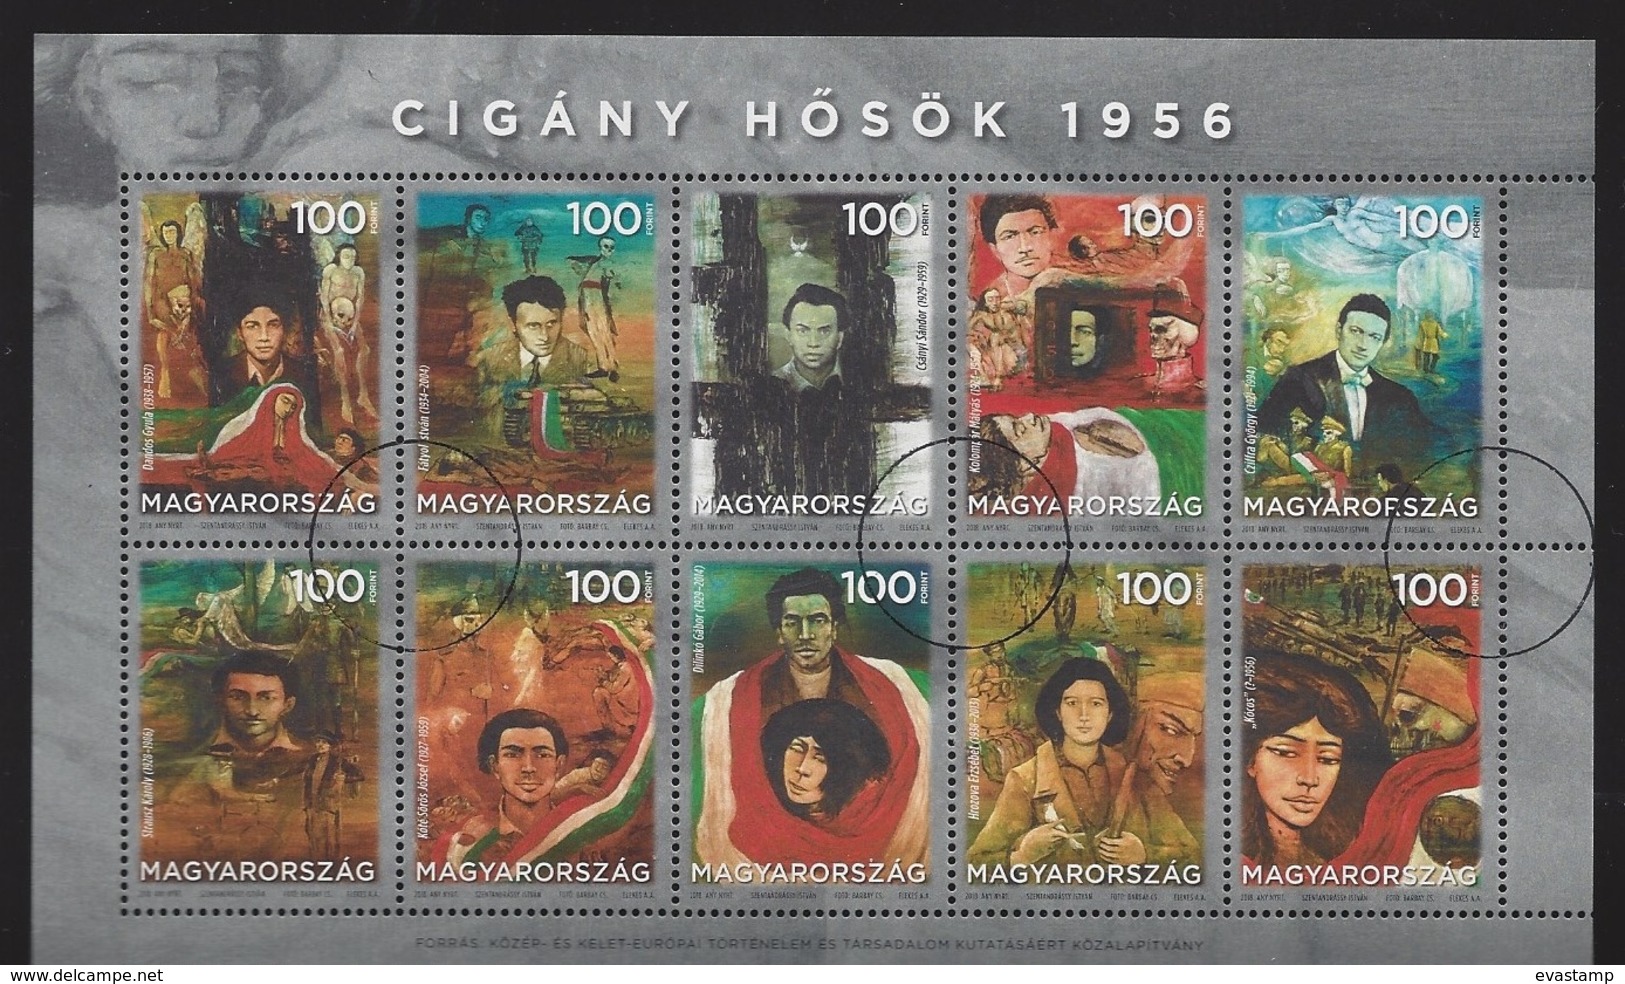 HUNGARY - 2018. Minisheet - Gipsy Heroes Of The Revolution 1956. USED!!! - Oblitérés